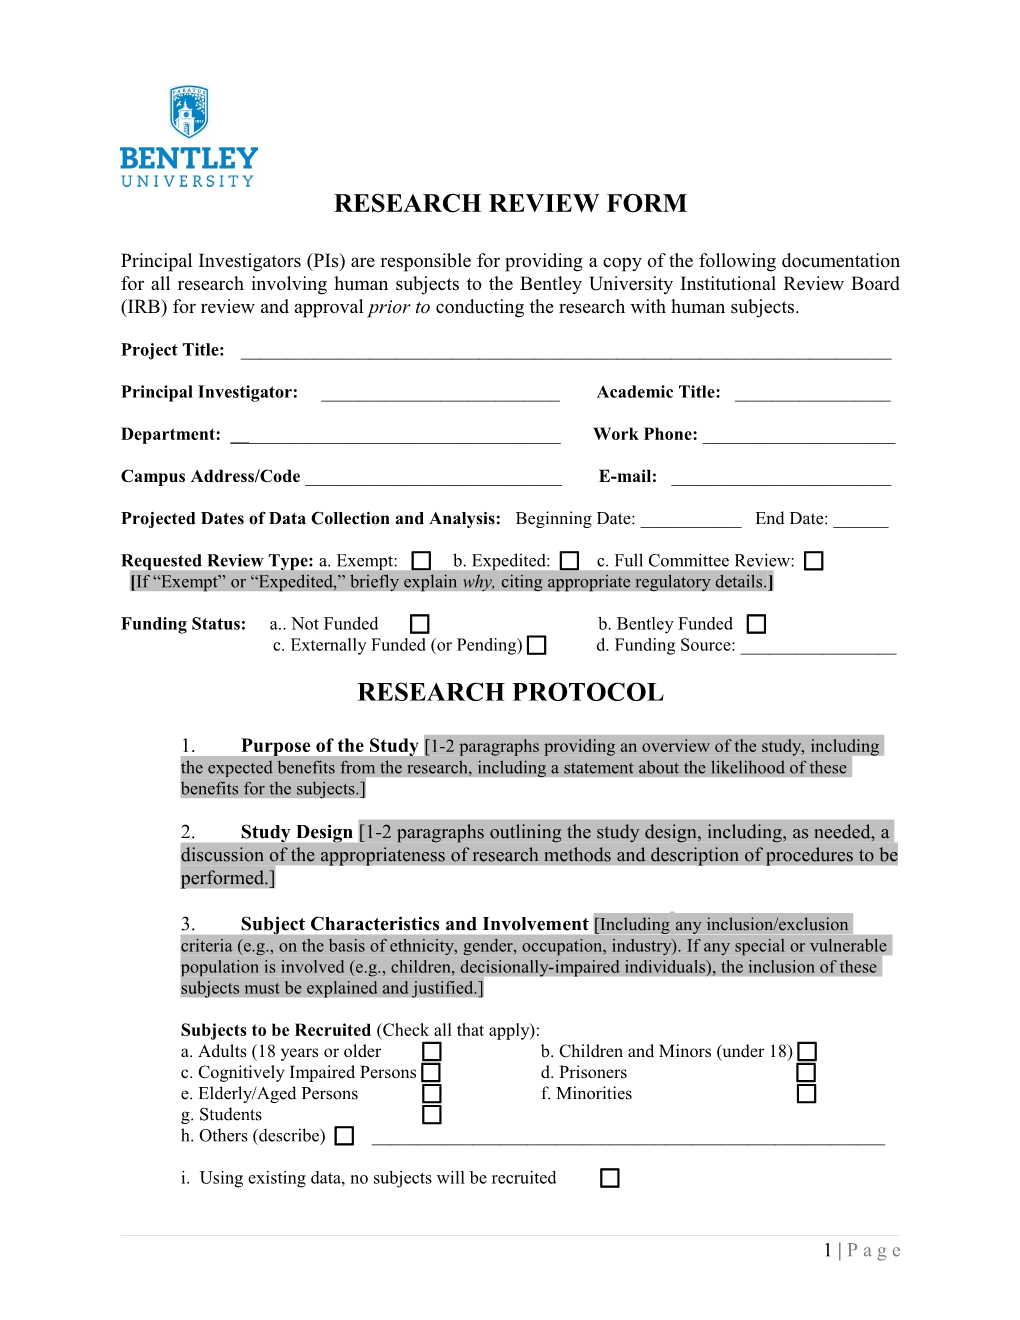 Research Review Form